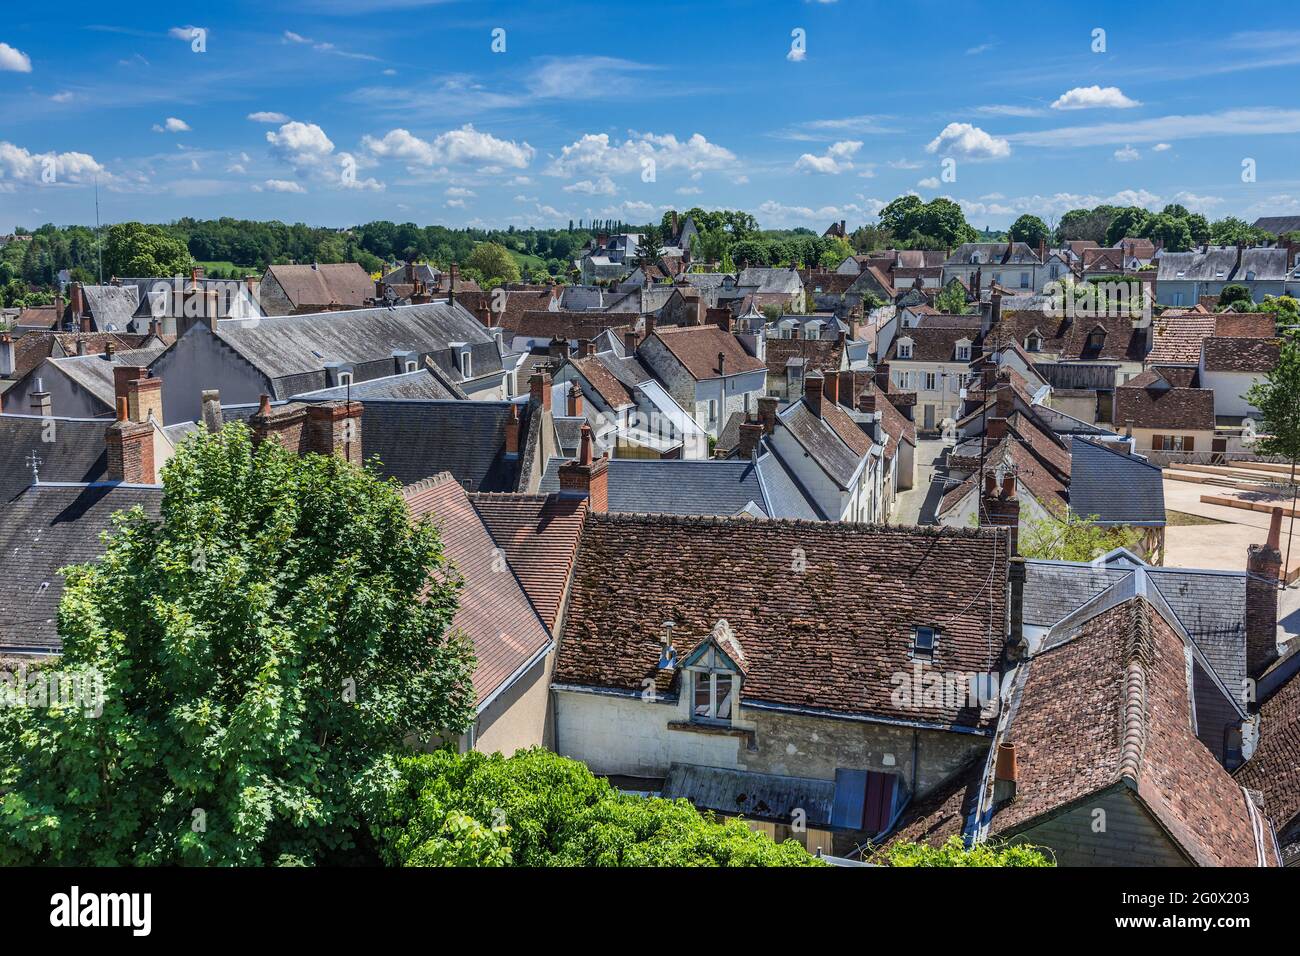 View over rooftops in old town of Saint-Aignan, Loir-et-Cher (41), France. Stock Photo